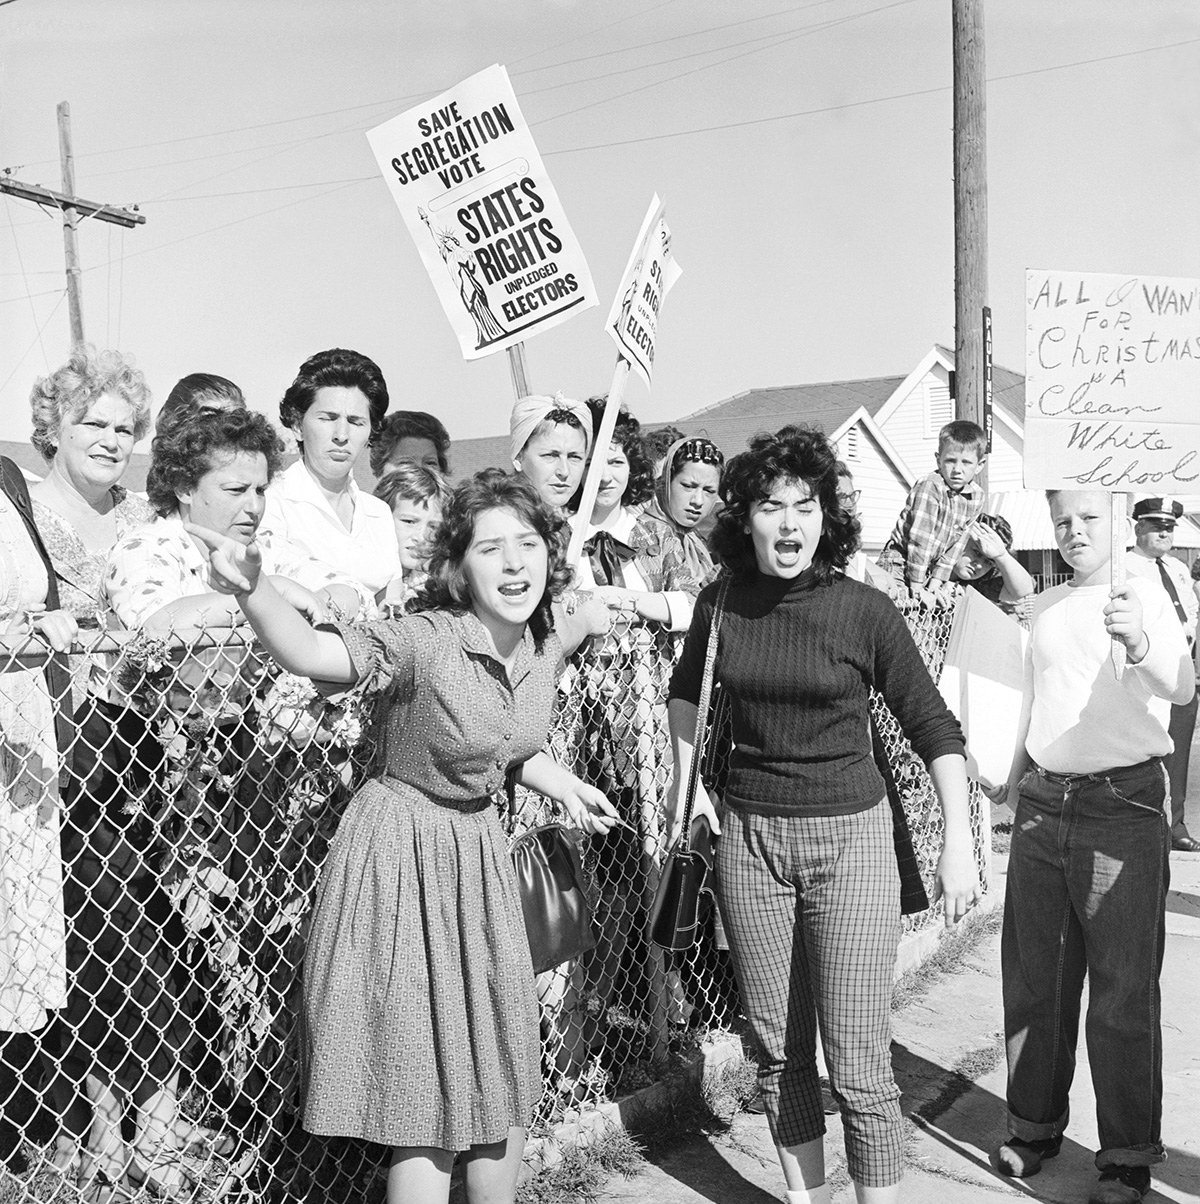 Women and teenagers at William Franz Elementary School yell at police officers during a protest against the desegregation of the school.